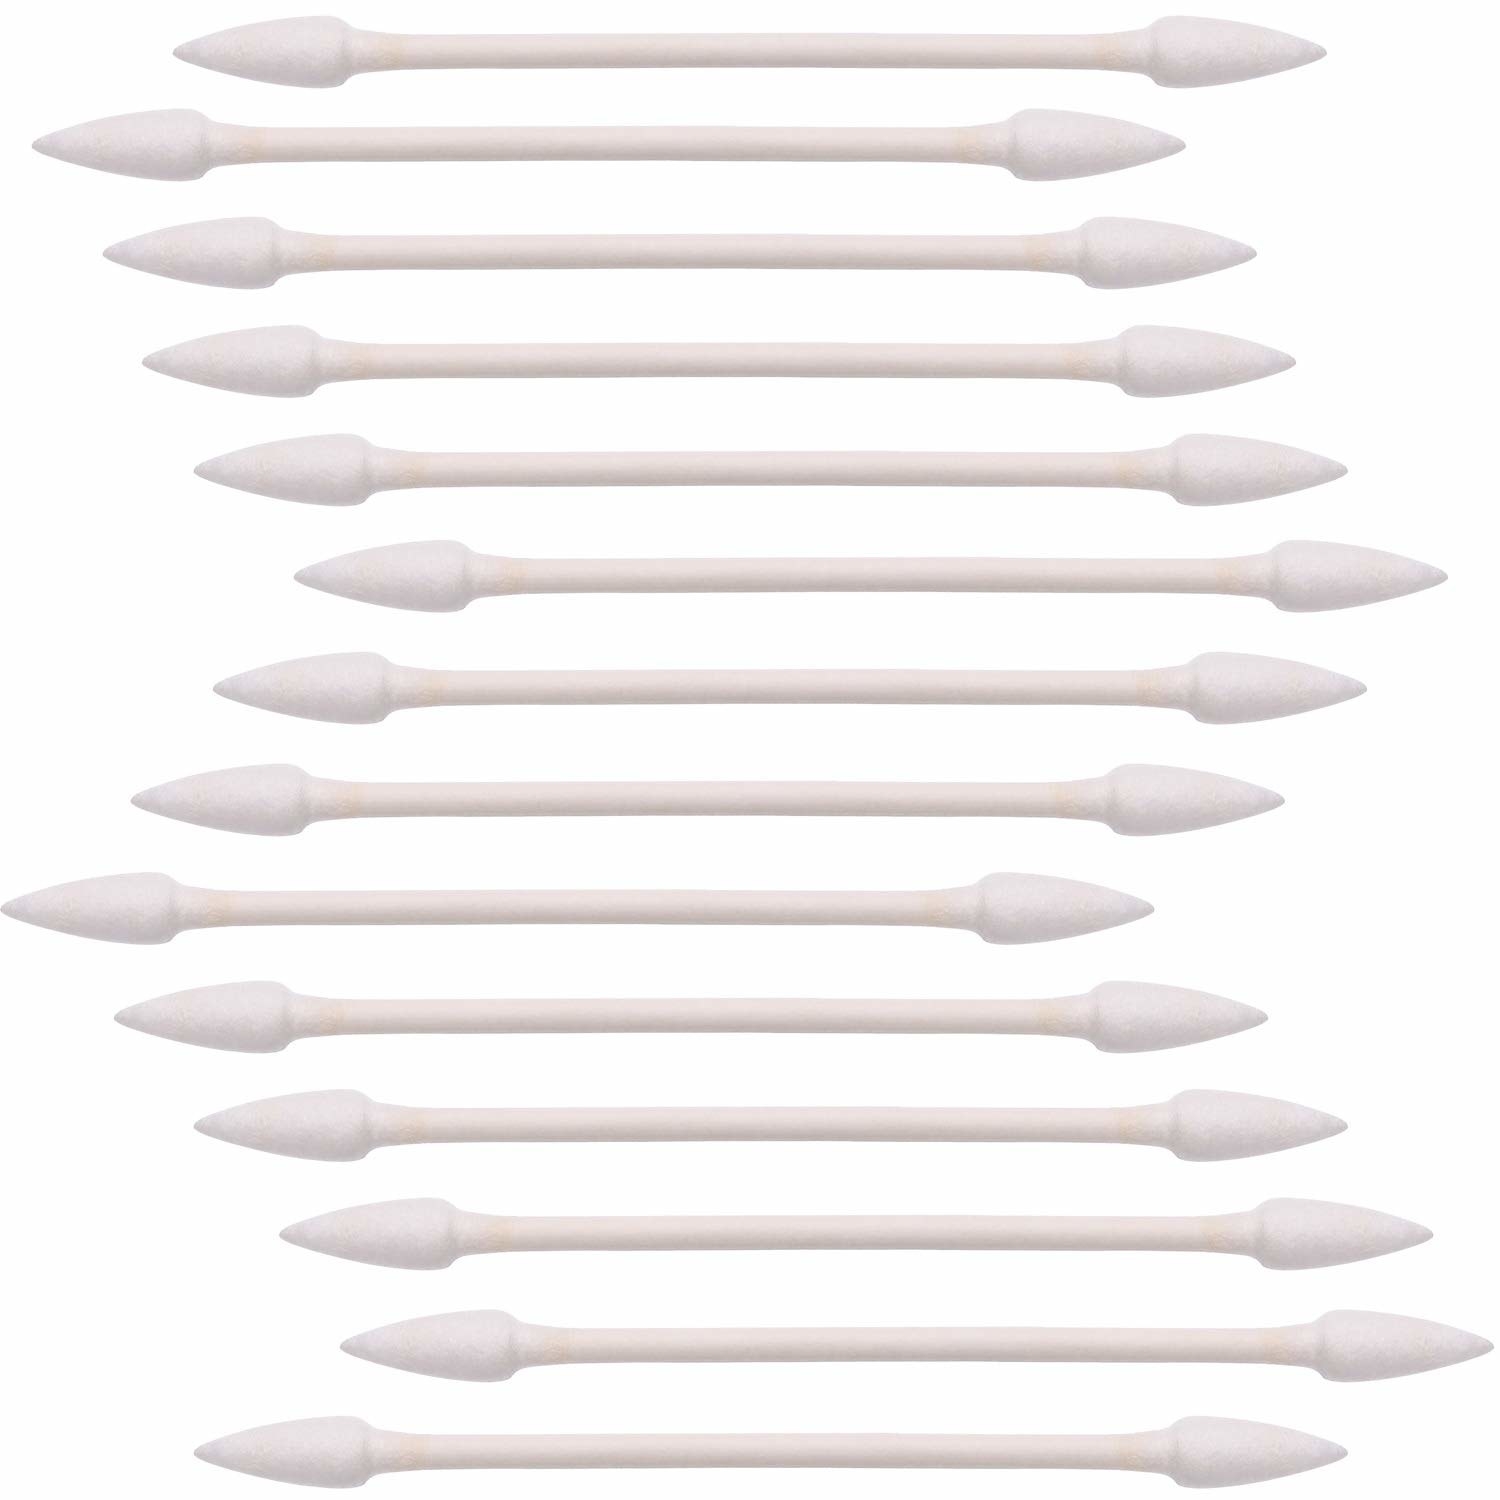 The pointed-end swabs